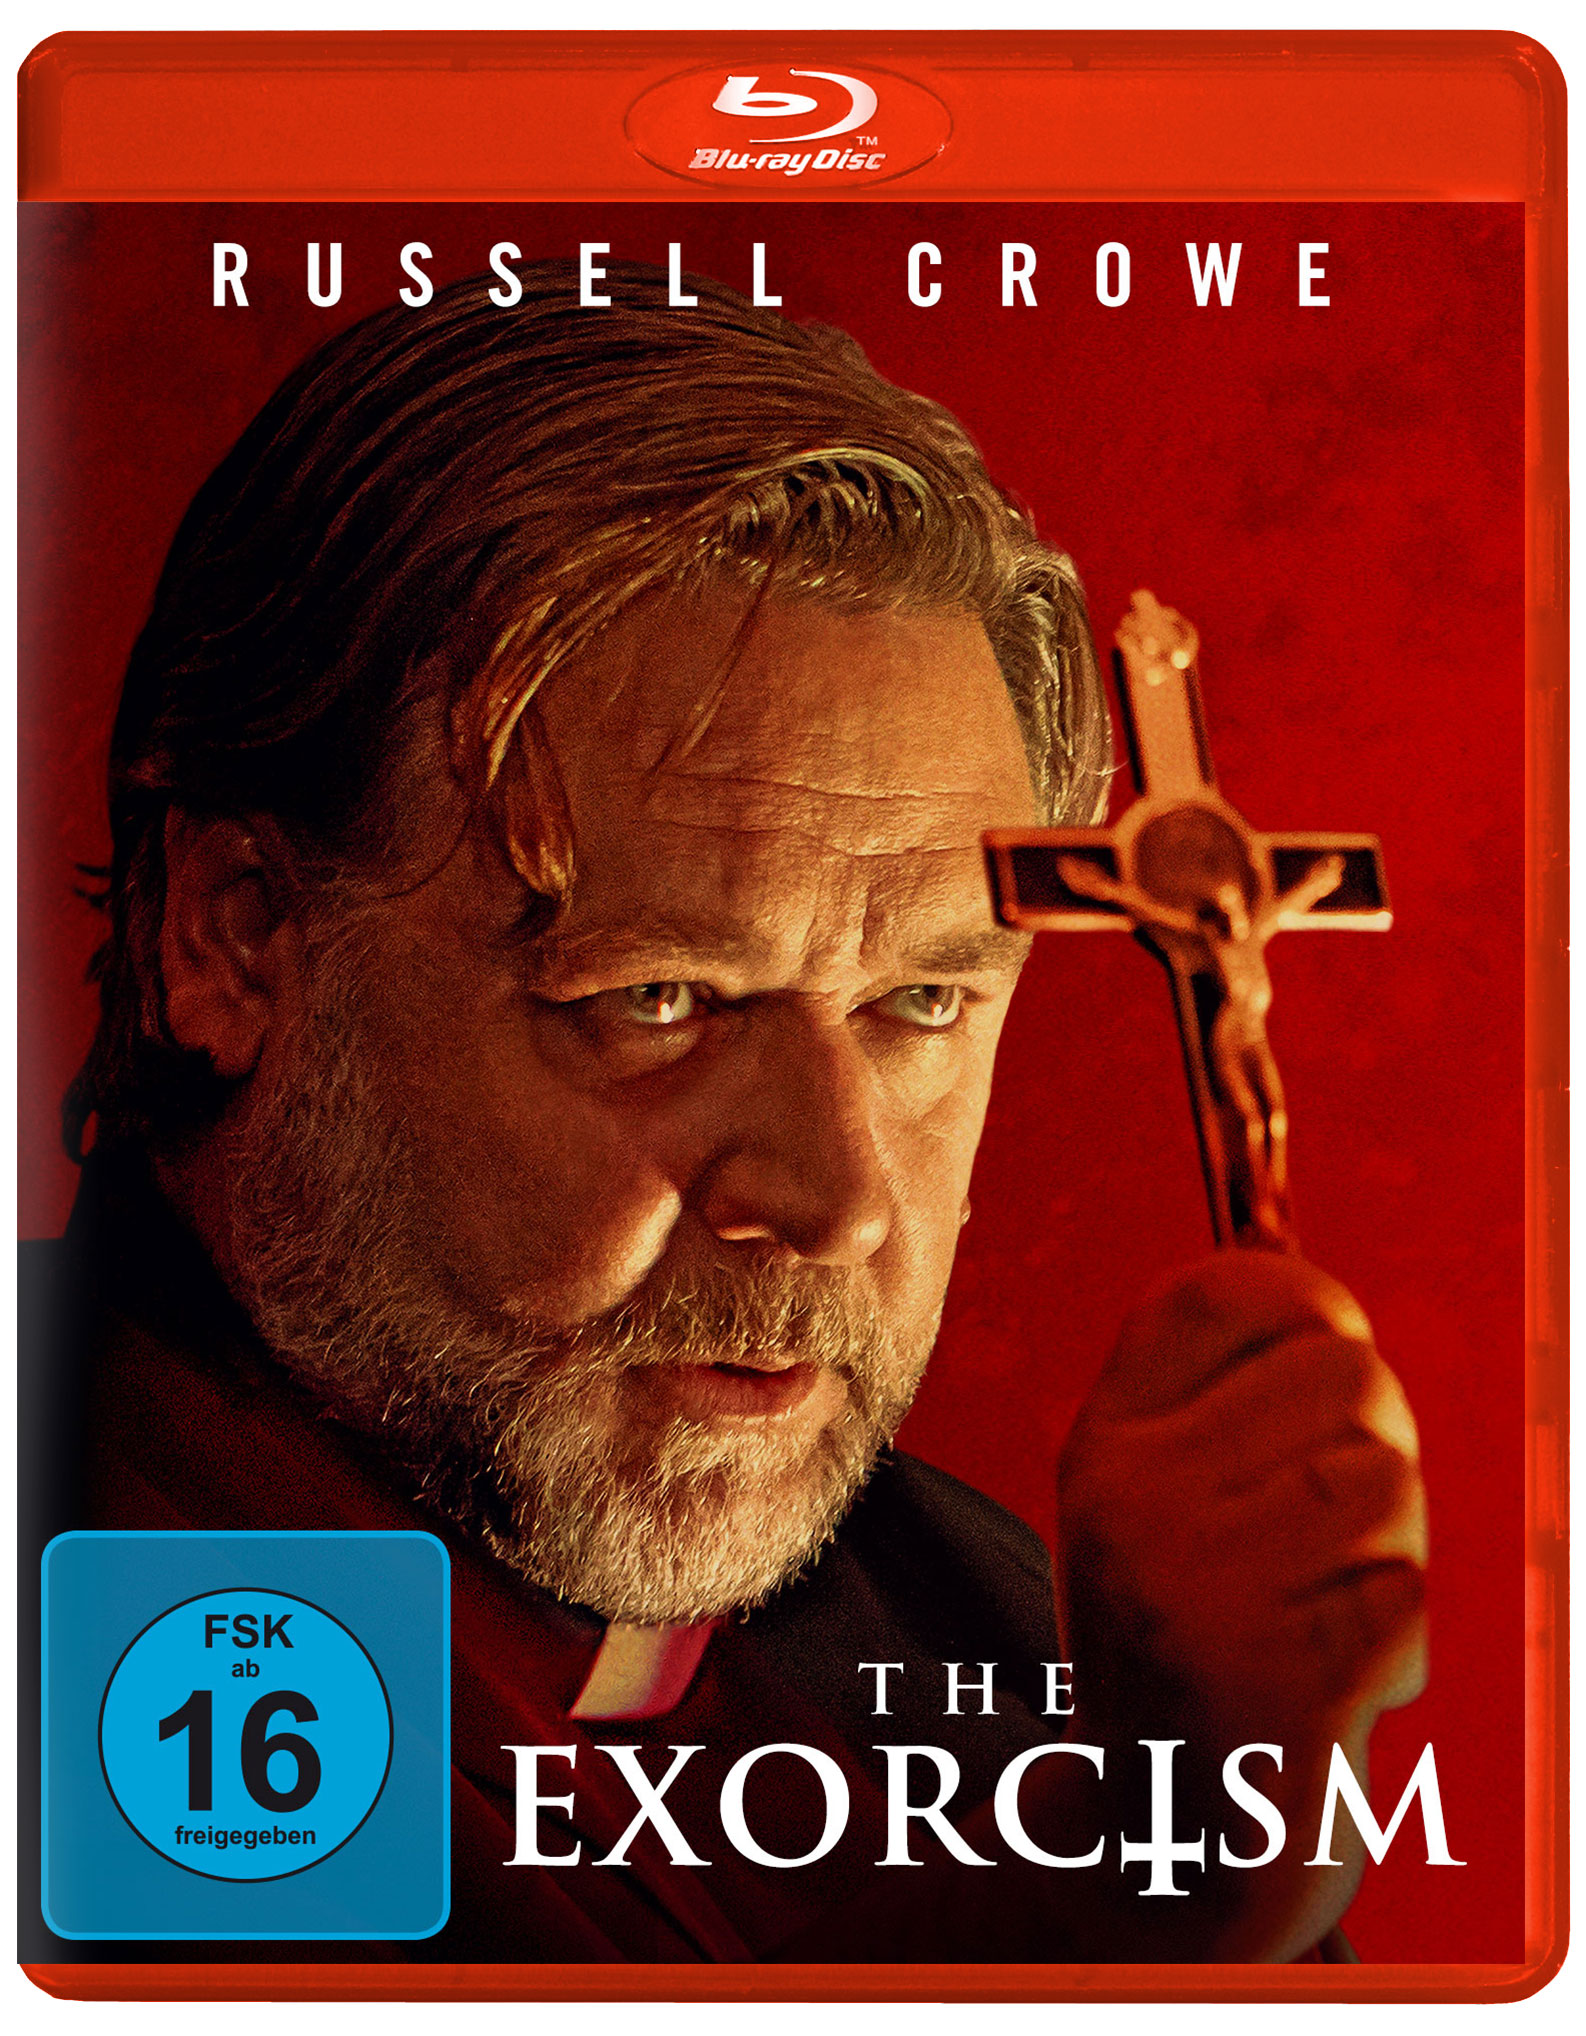 The Exorcism (Blu-ray)